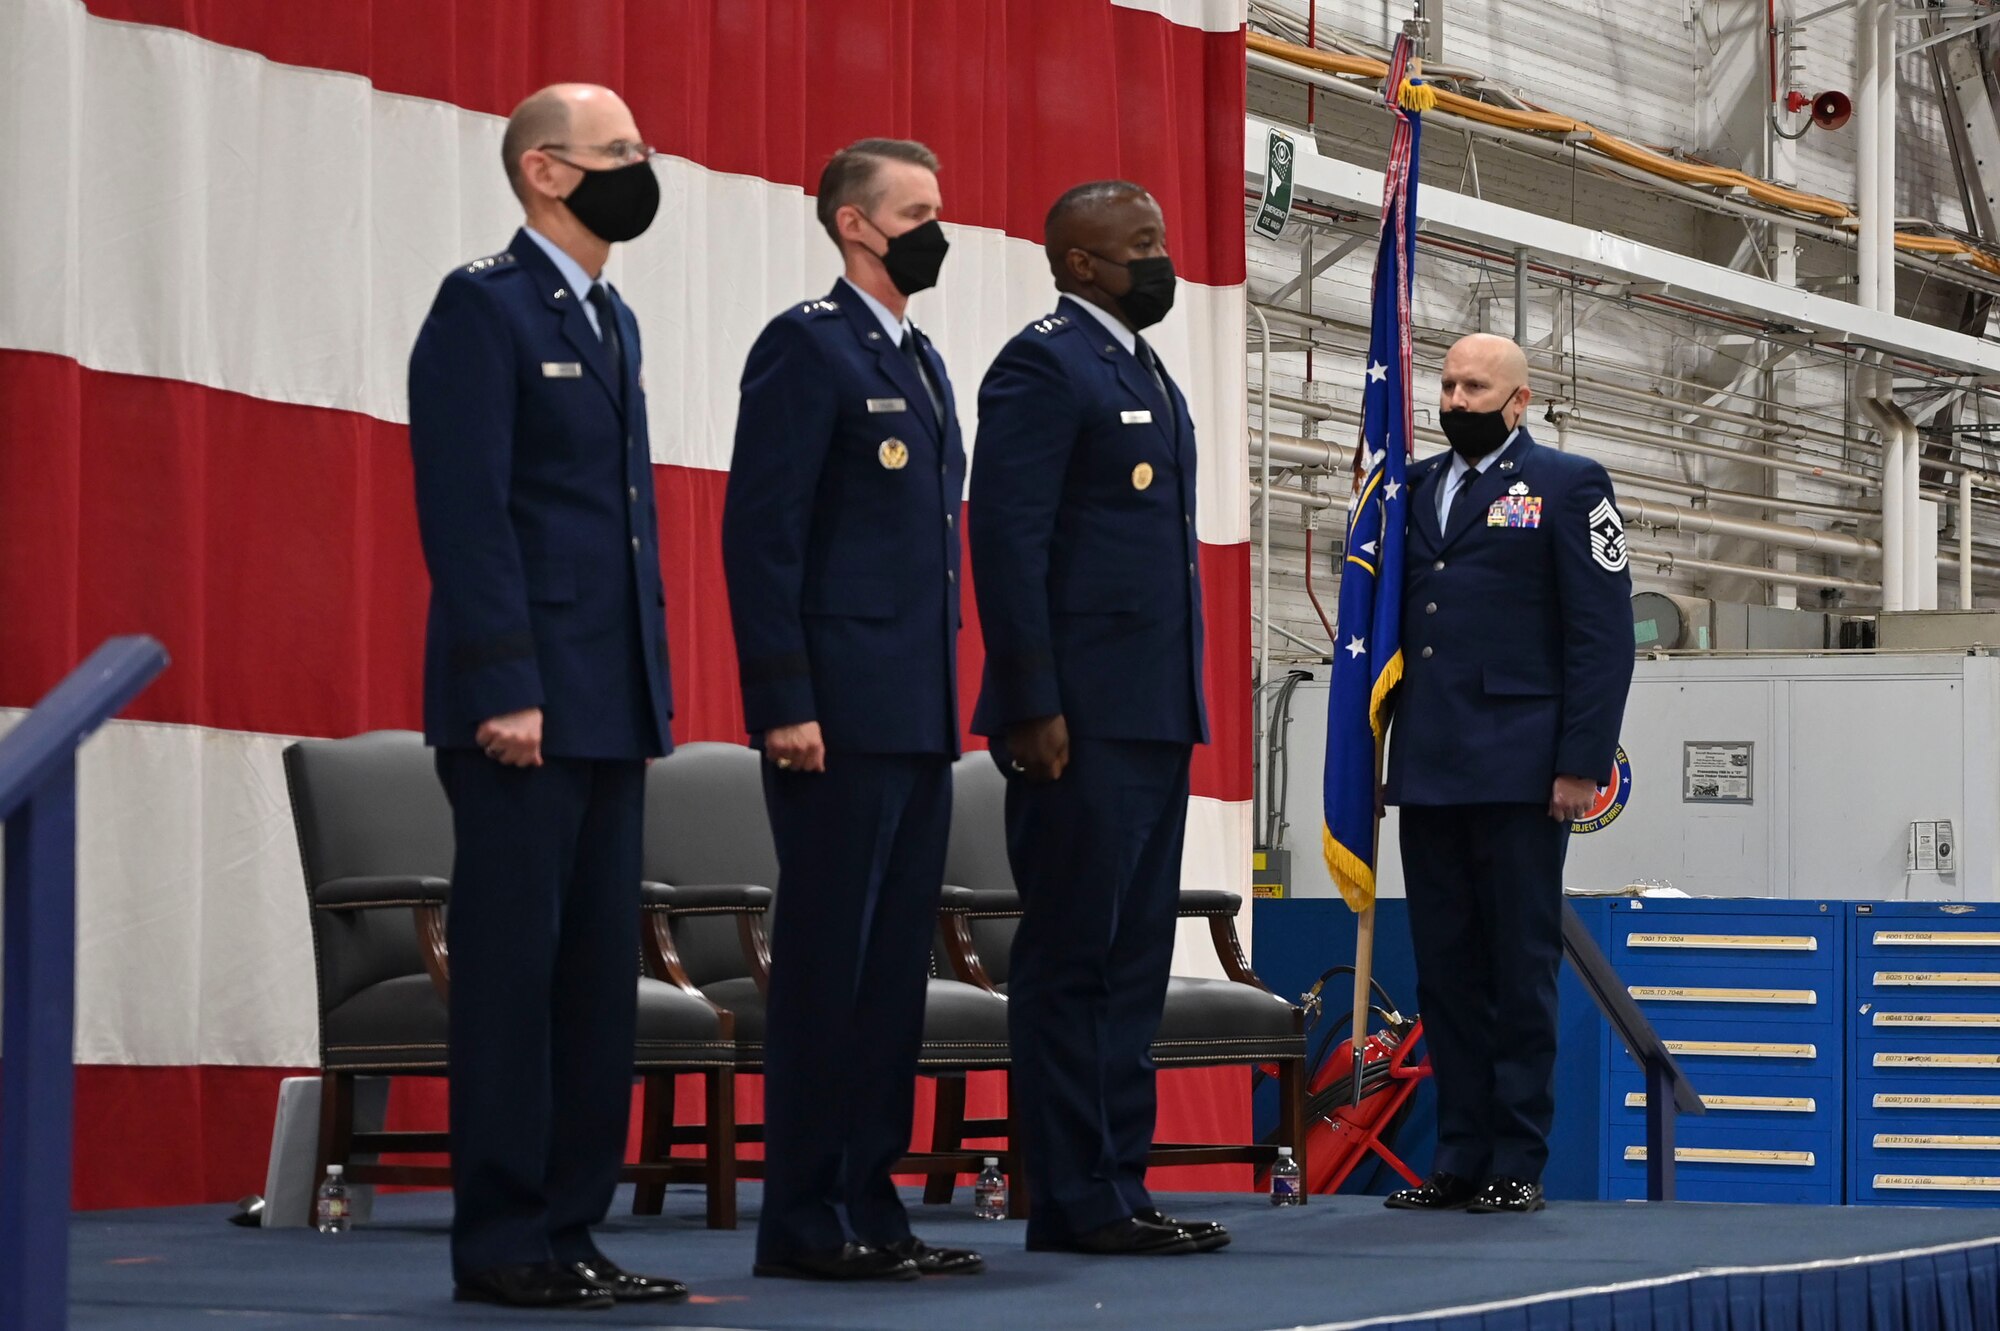 220815-F-JC105-1077
Gen. Duke Z. Richardson, commander, Air Force Materiel Command, Lt. Gen Tom D. Miller, outgoing commander, Air Force Sustainment Center, Lt. Gen. Stacey T. Hawkins, incoming commander, Air Force Sustainment Center stand at attention as Chief Master Sgt. Robert C. Schultz, command chief, Air Force Sustainment Center delivers the guidon to be presented during the change of command ceremony gets underway at Tinker Air Force Base, Oklahoma, Aug. 15, 2022